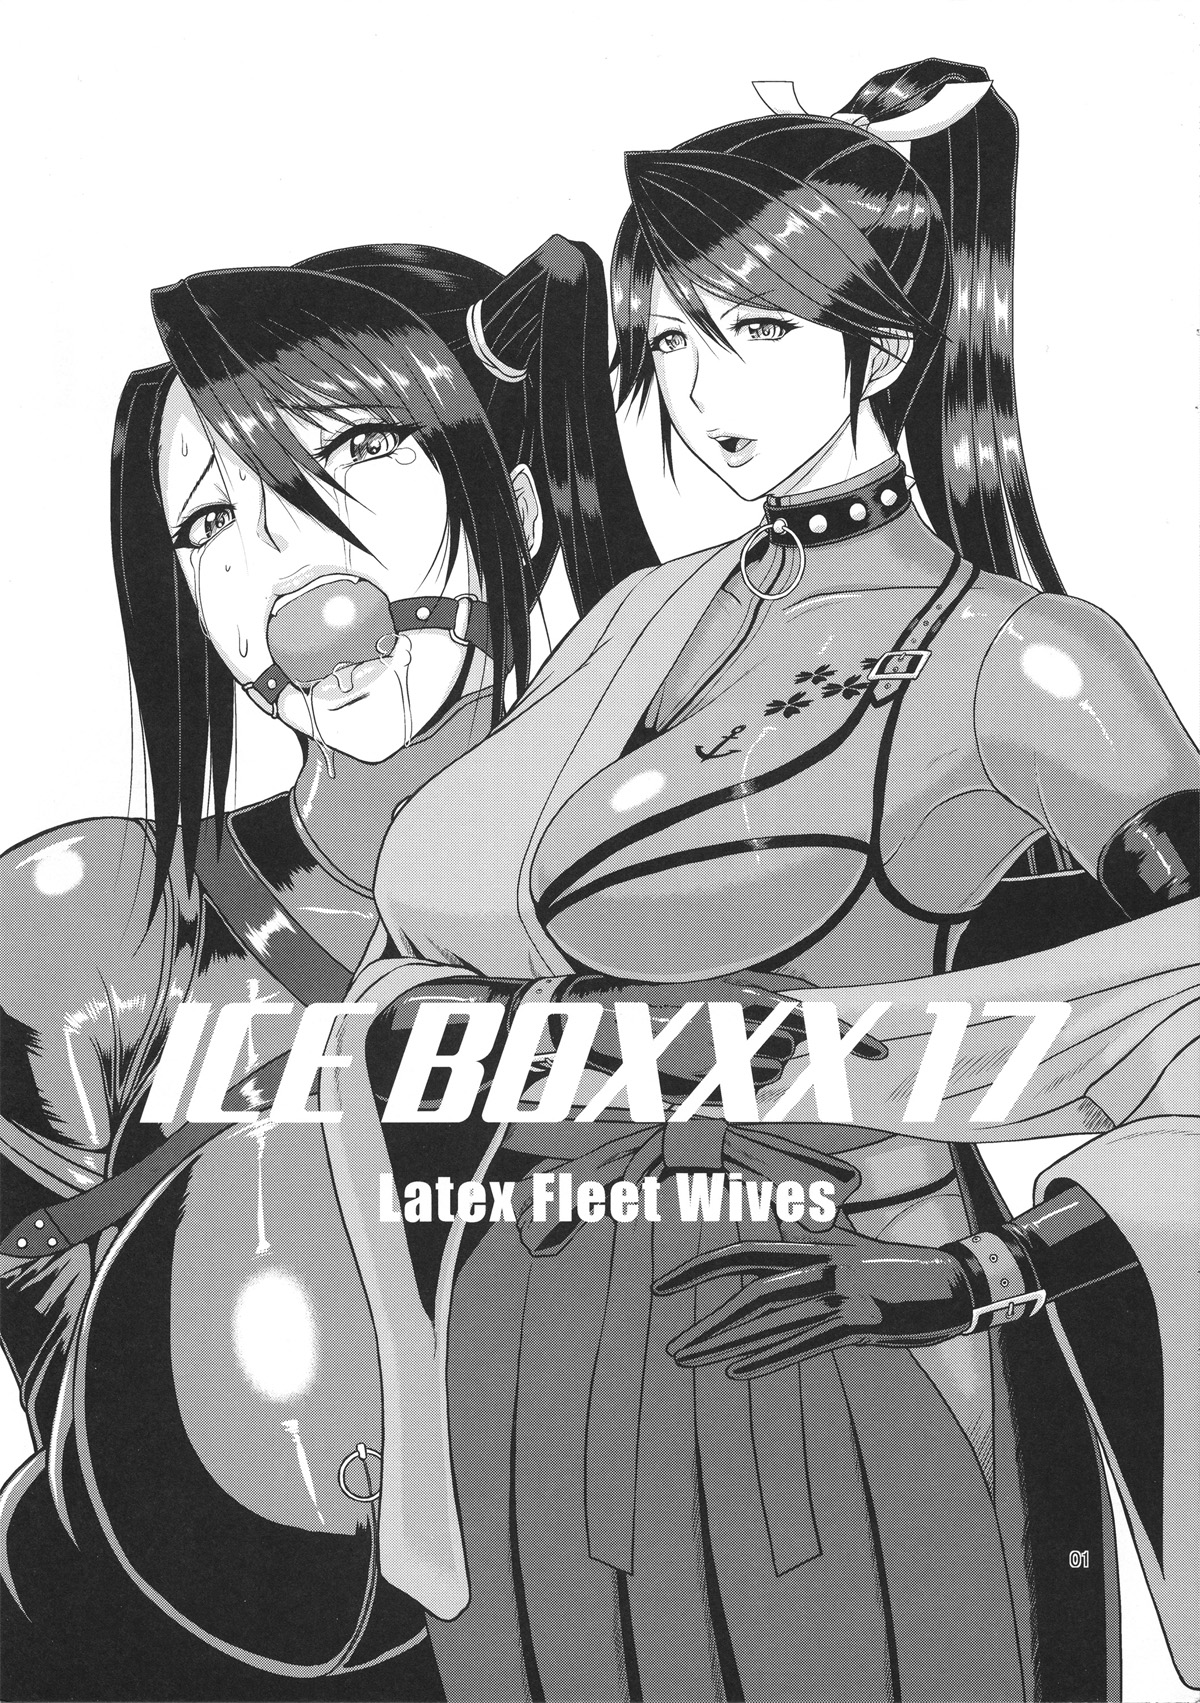 (CT27) [SERIOUS GRAPHICS (ICE)] ICE BOXXX 17 Latex Fleet Wives (Kantai Collection -KanColle-) [Chinese] [管少女汉化] (こみトレ27) [SERIOUS GRAPHICS (ICE)] ICE BOXXX 17 Latex Fleet Wives (艦隊これくしょん -艦これ-) [中国翻訳]